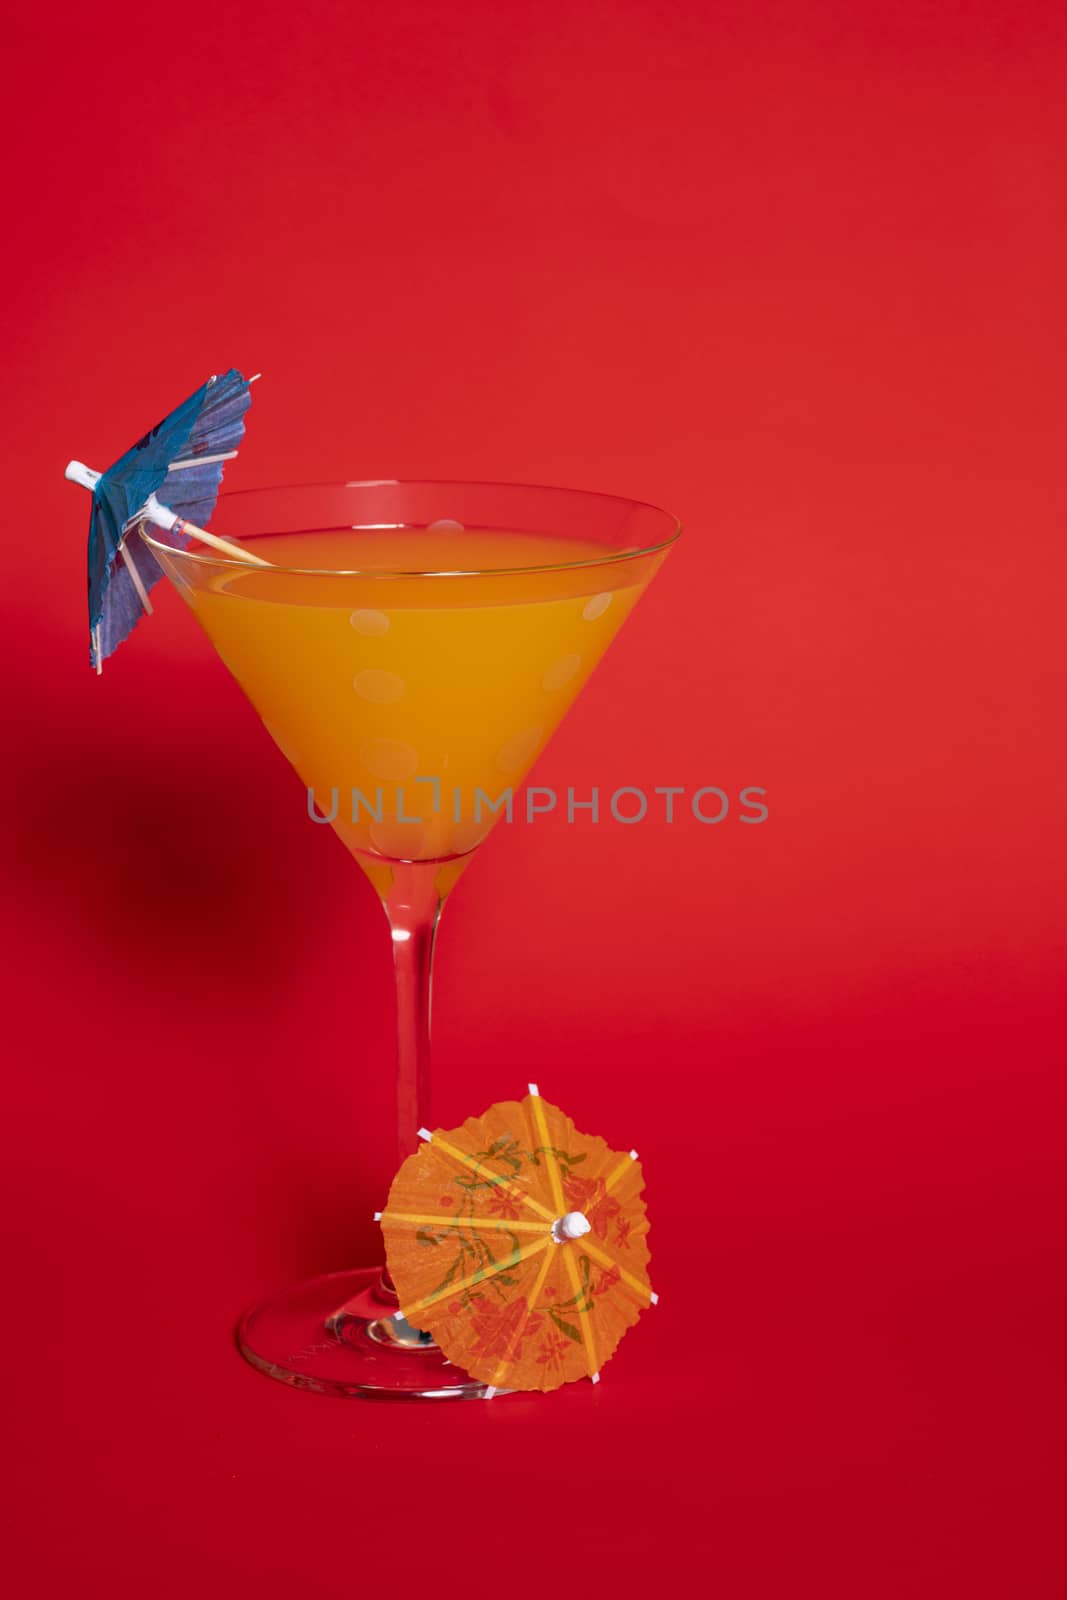 Orange drink with a blue umbrella in a martini glass set against a solid red background. An orange umbrella lies at the base of the glass.